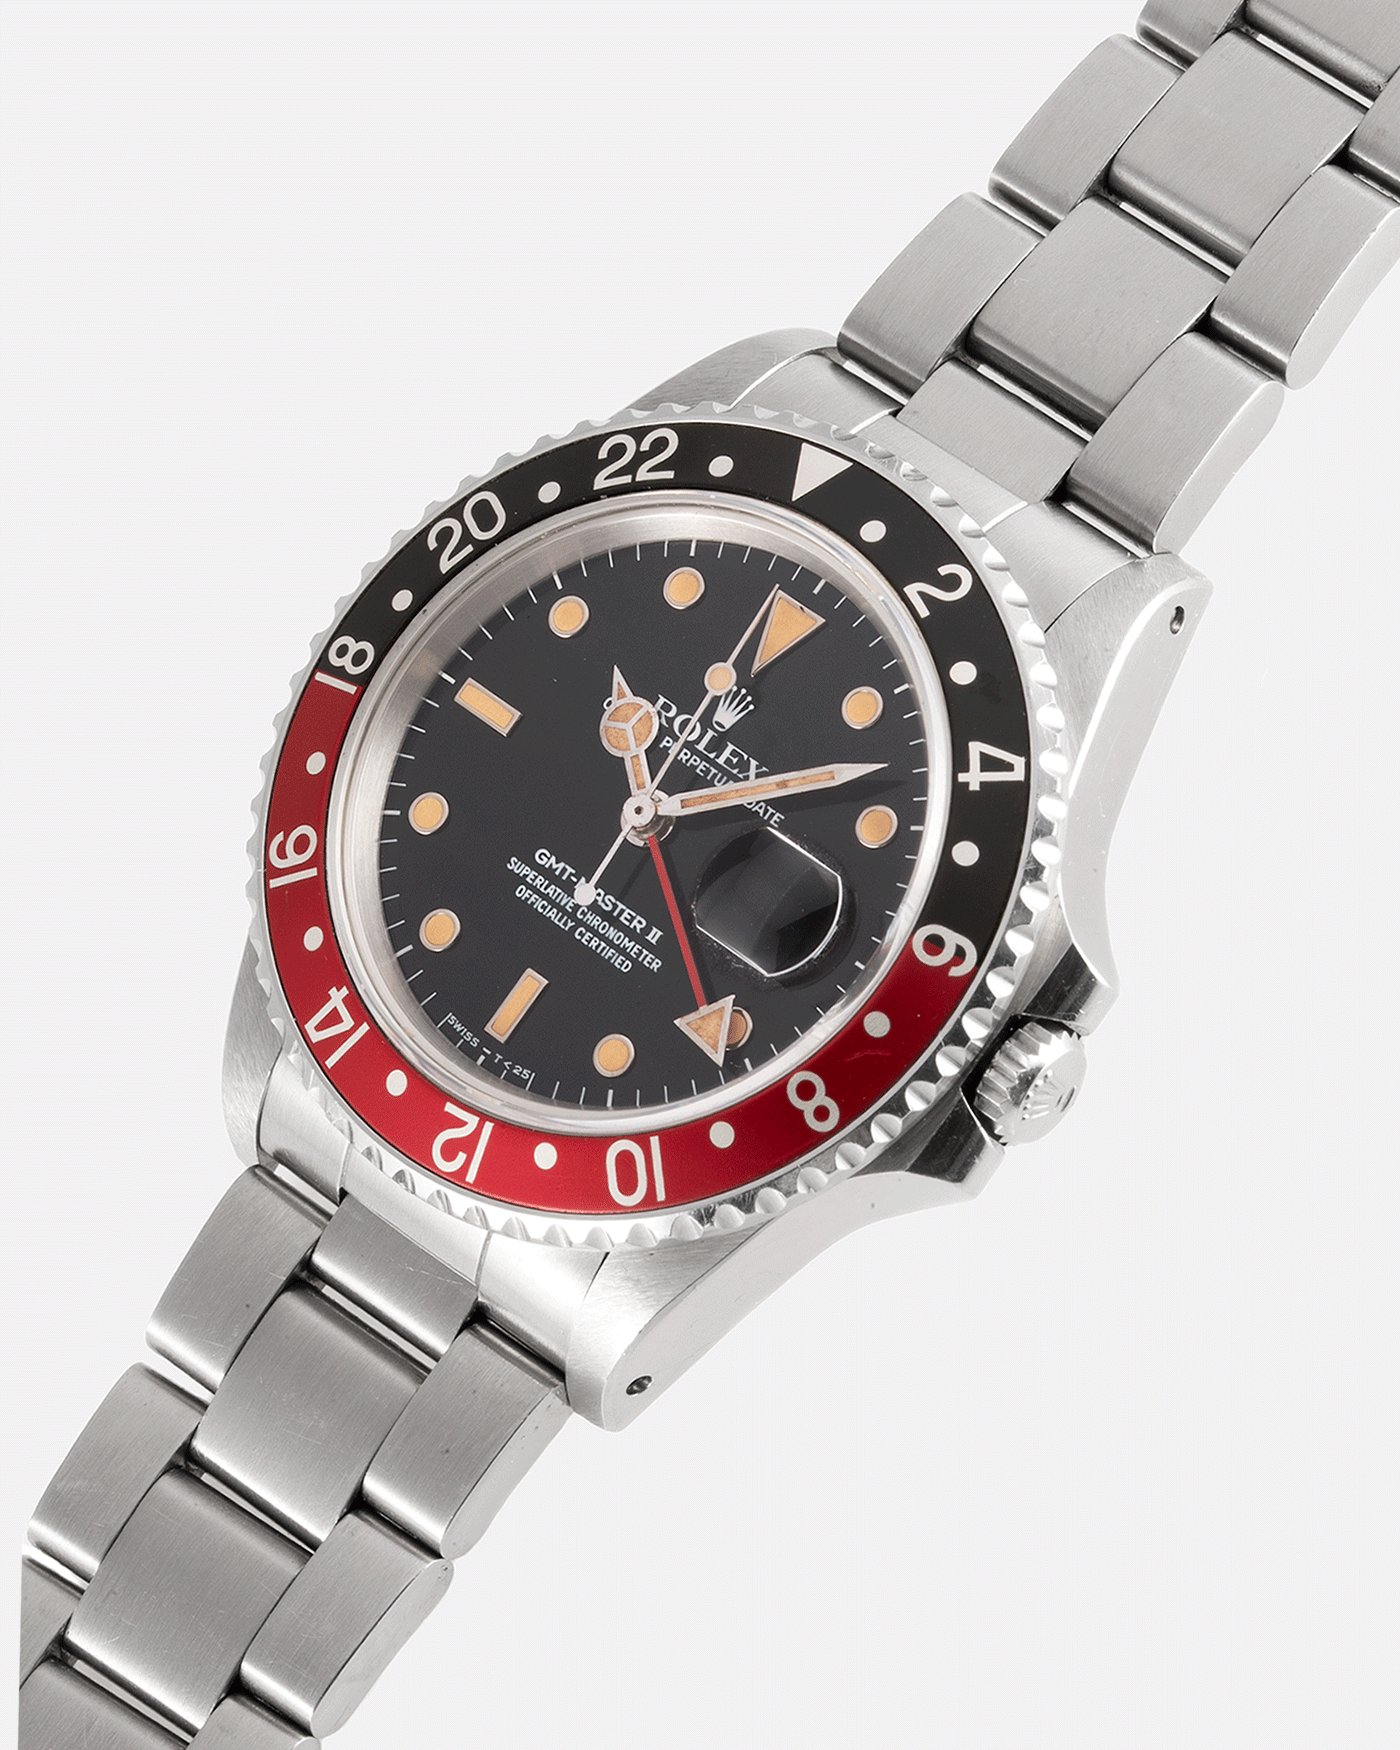 Brand: Rolex Year: 1987 Model: GMT-Master II Reference Number: 16760 Serial Number: 963XXXX Material: Stainless Steel Movement: Cal. 3085 Case Diameter: 40mm Lug Width: 20mm Bracelet/Strap: Rolex Heavy Oyster 78360 with ‘501’ Endlinks and ‘L3’ Clasp